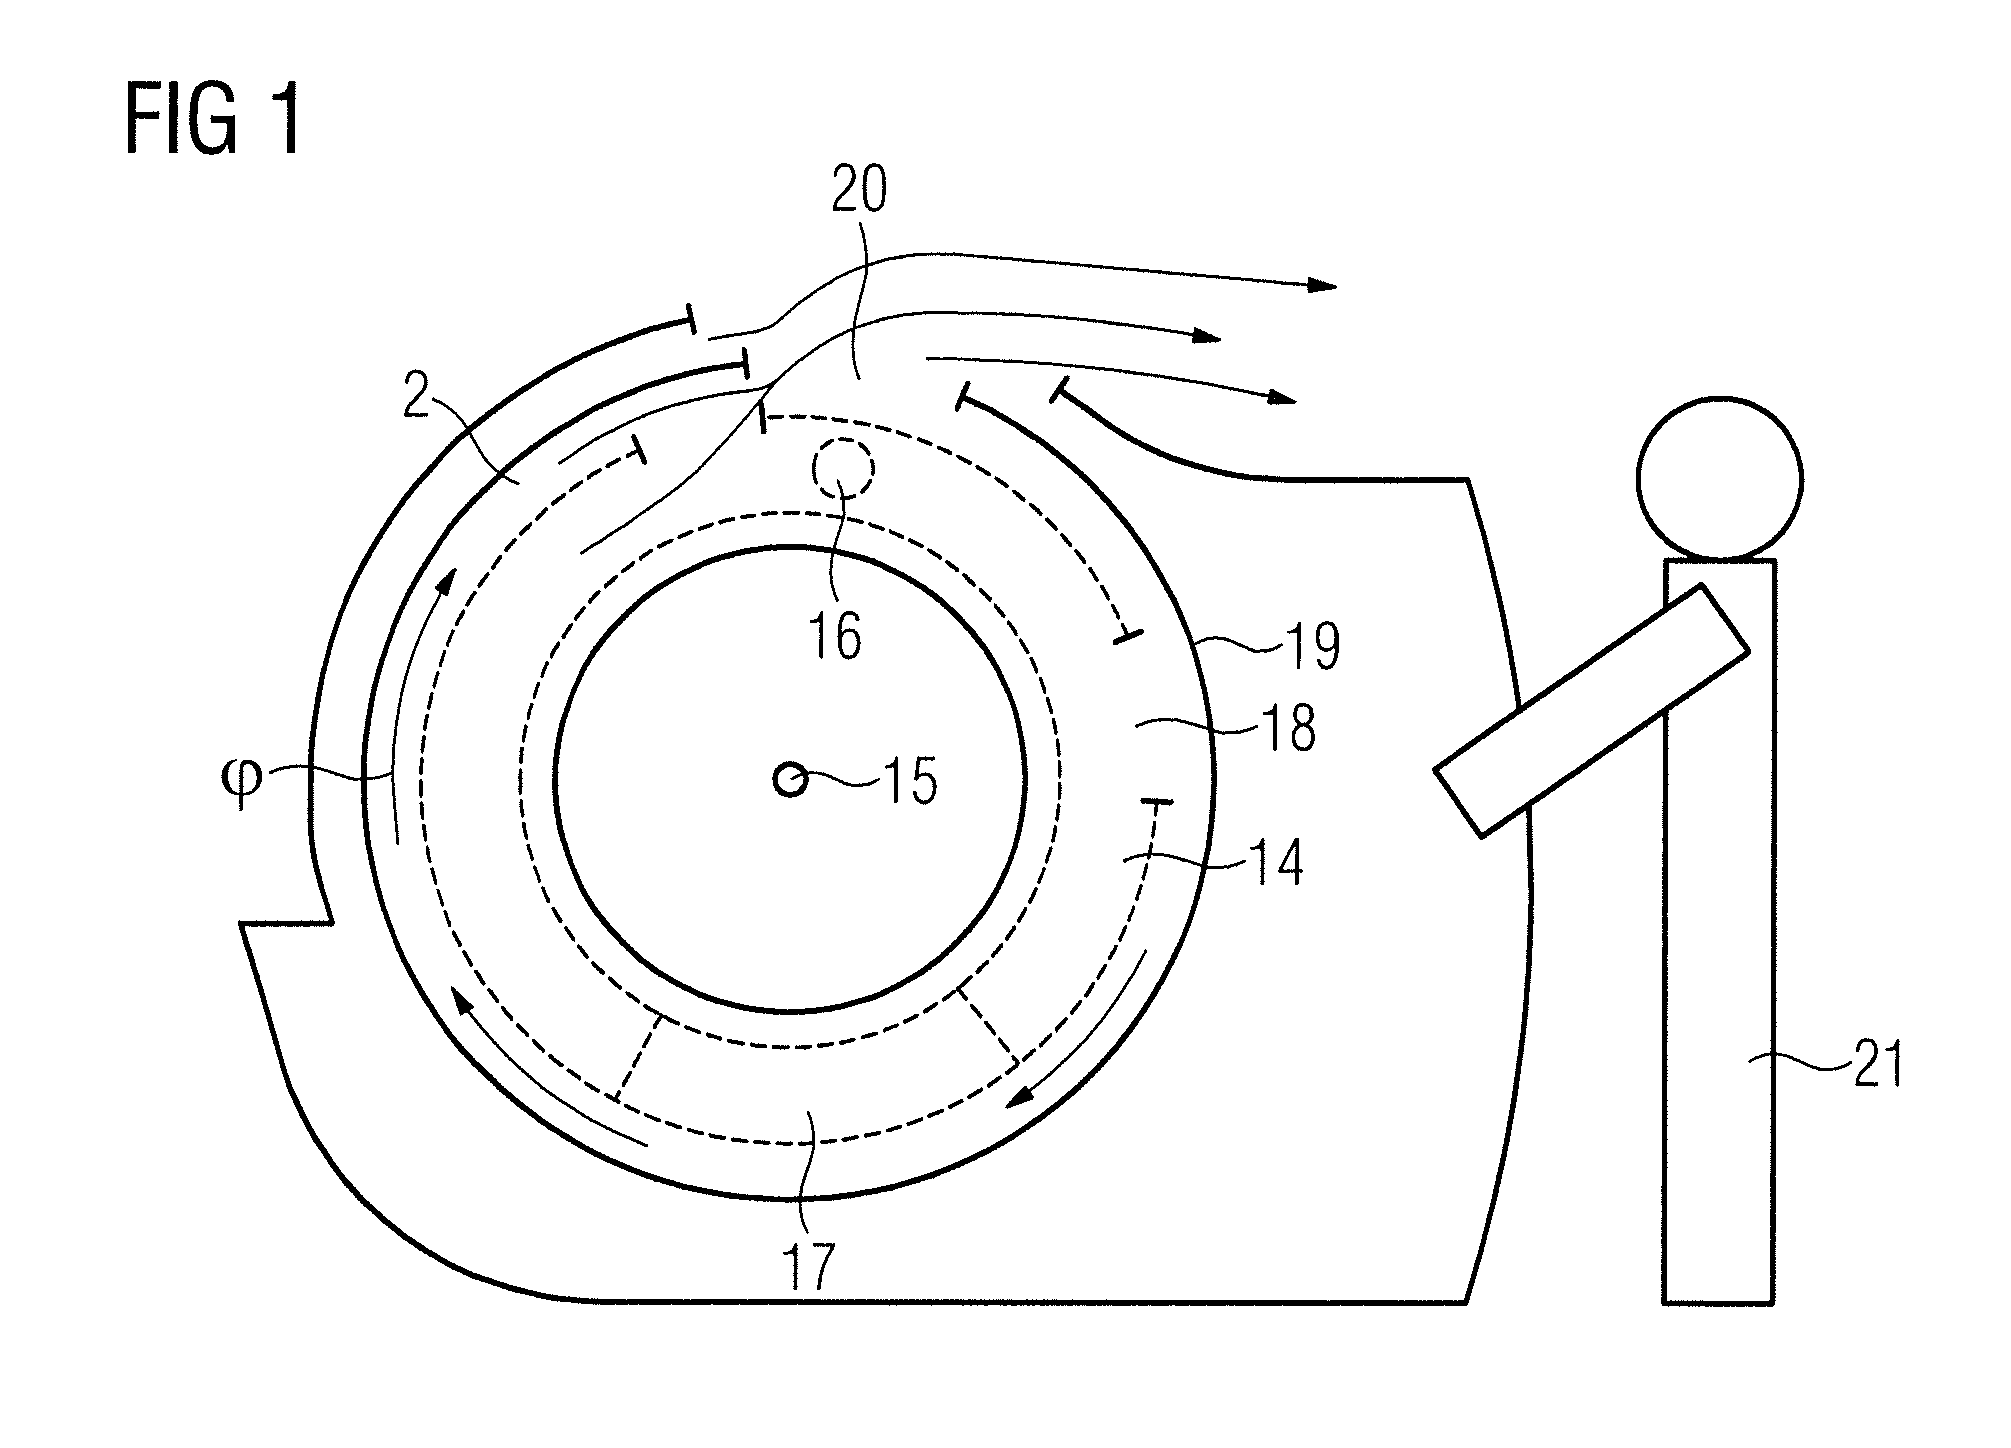 Tomography apparatus with an annular airflow channel with an air-diverting ventilation element